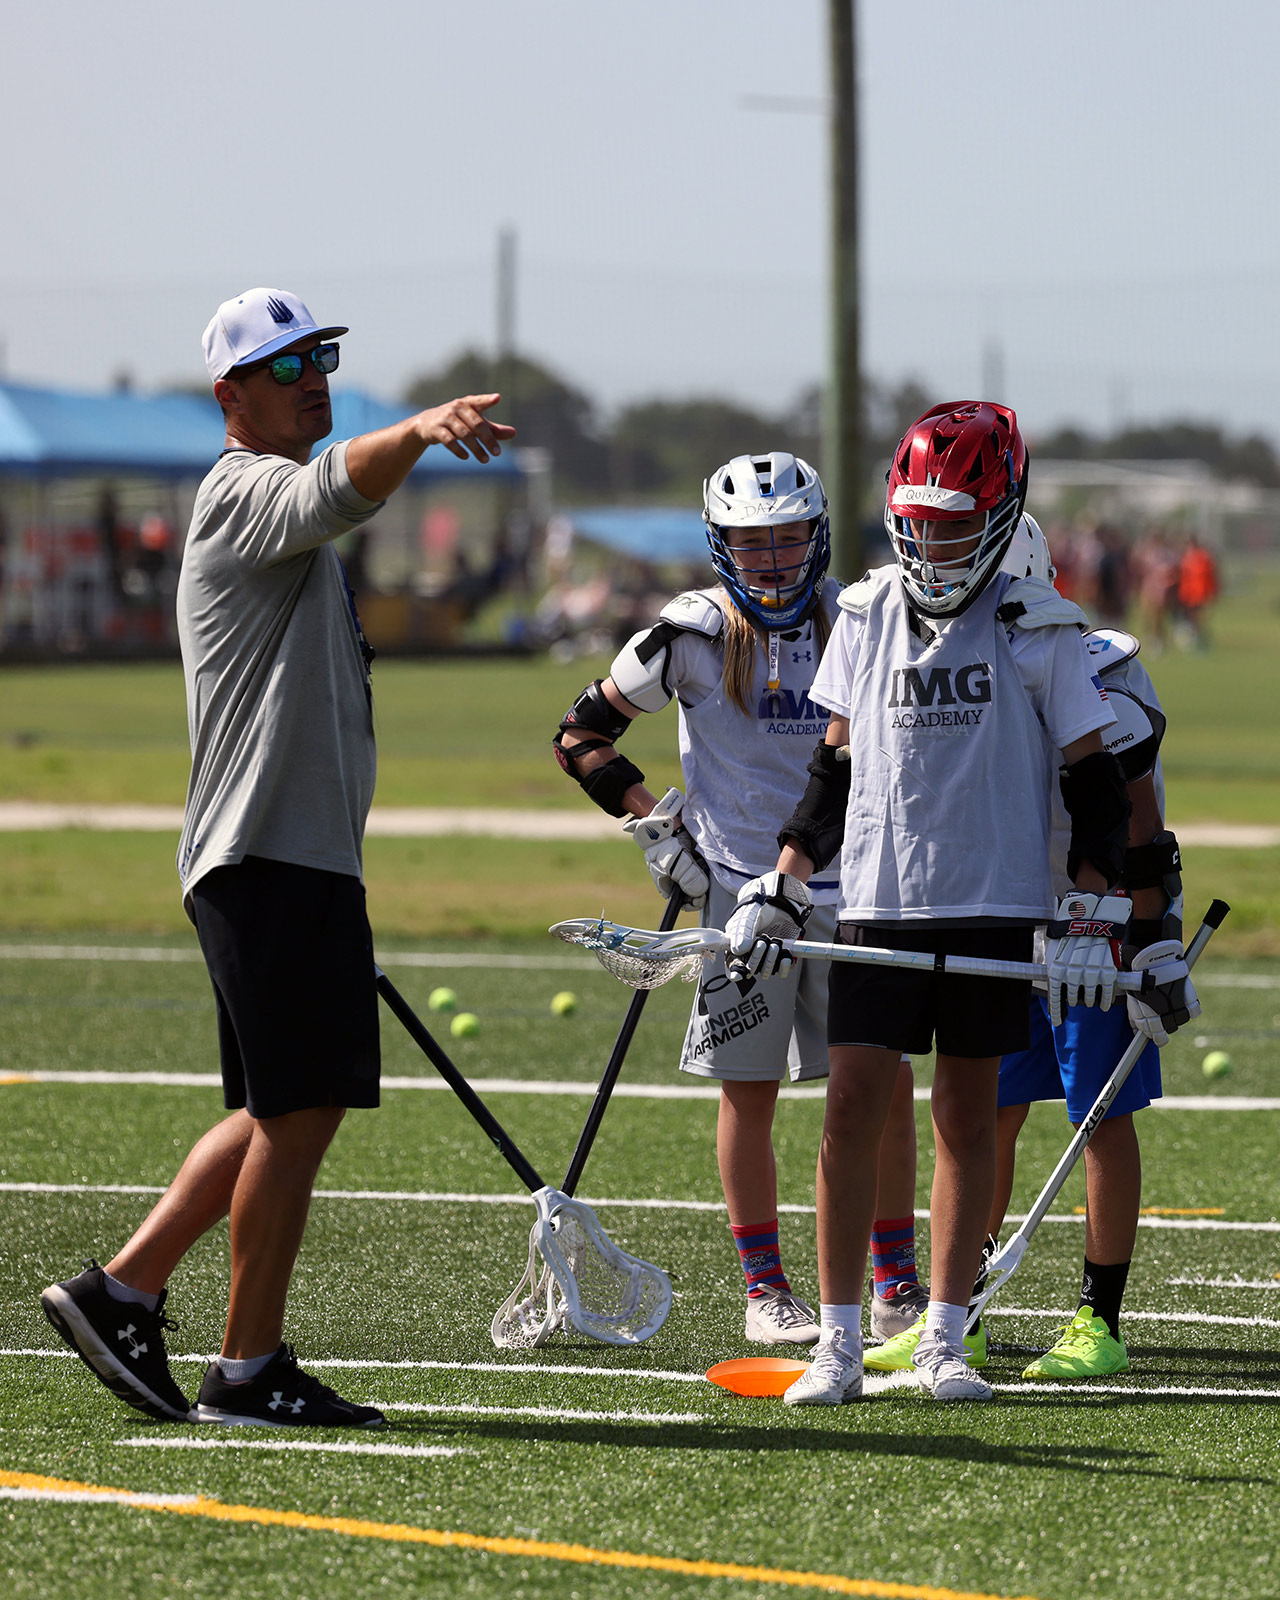 Lacrosse Camps Boys Lacrosse Camp IMG Academy